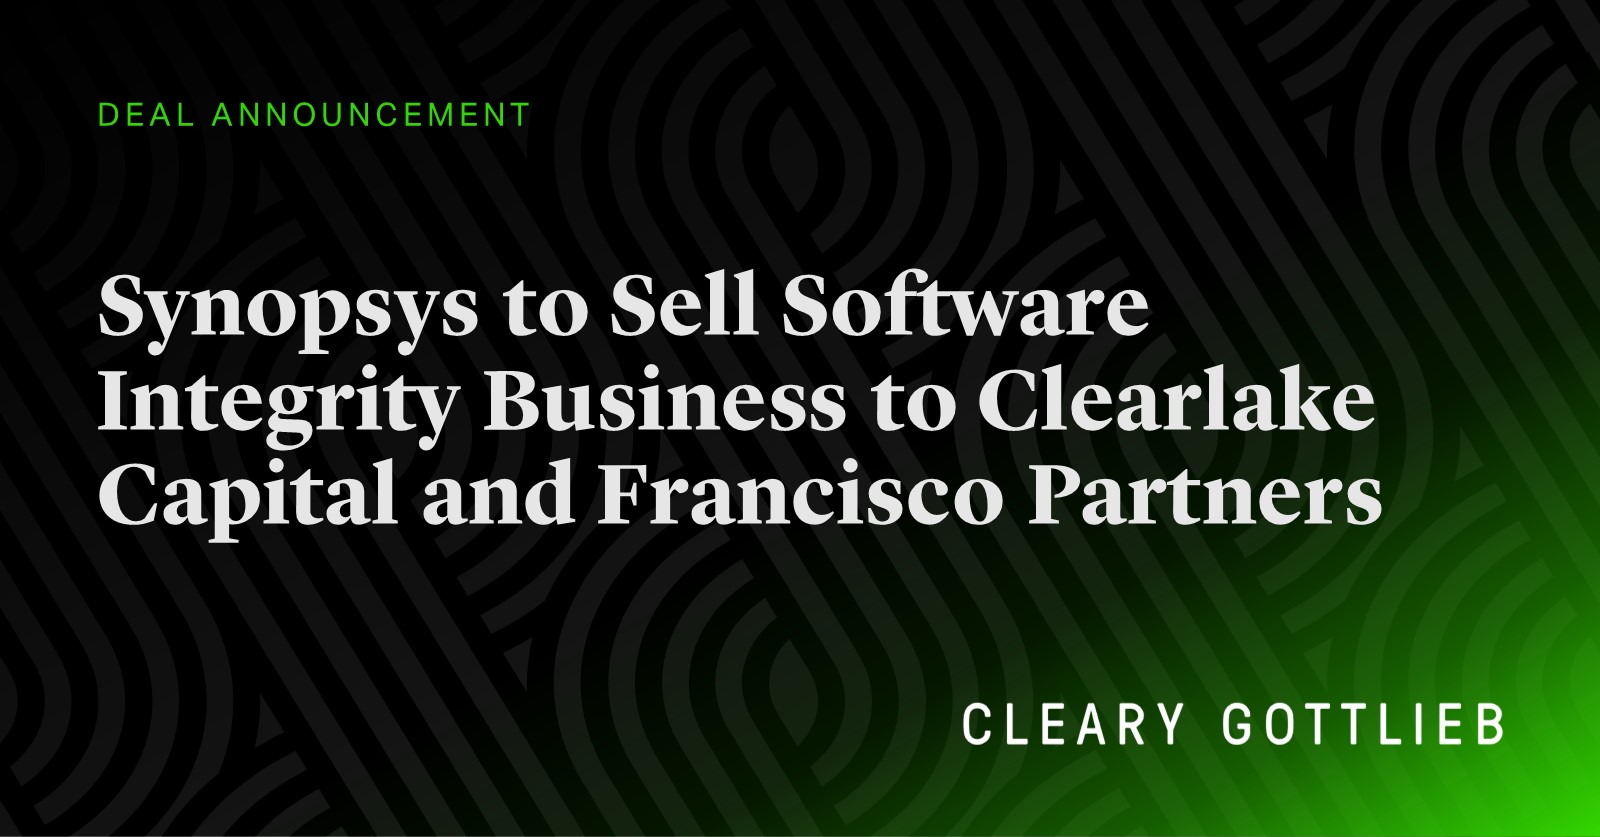 Synopsys Announces Sale of Software Integrity Business to Clearlake Capital and Francisco Partners